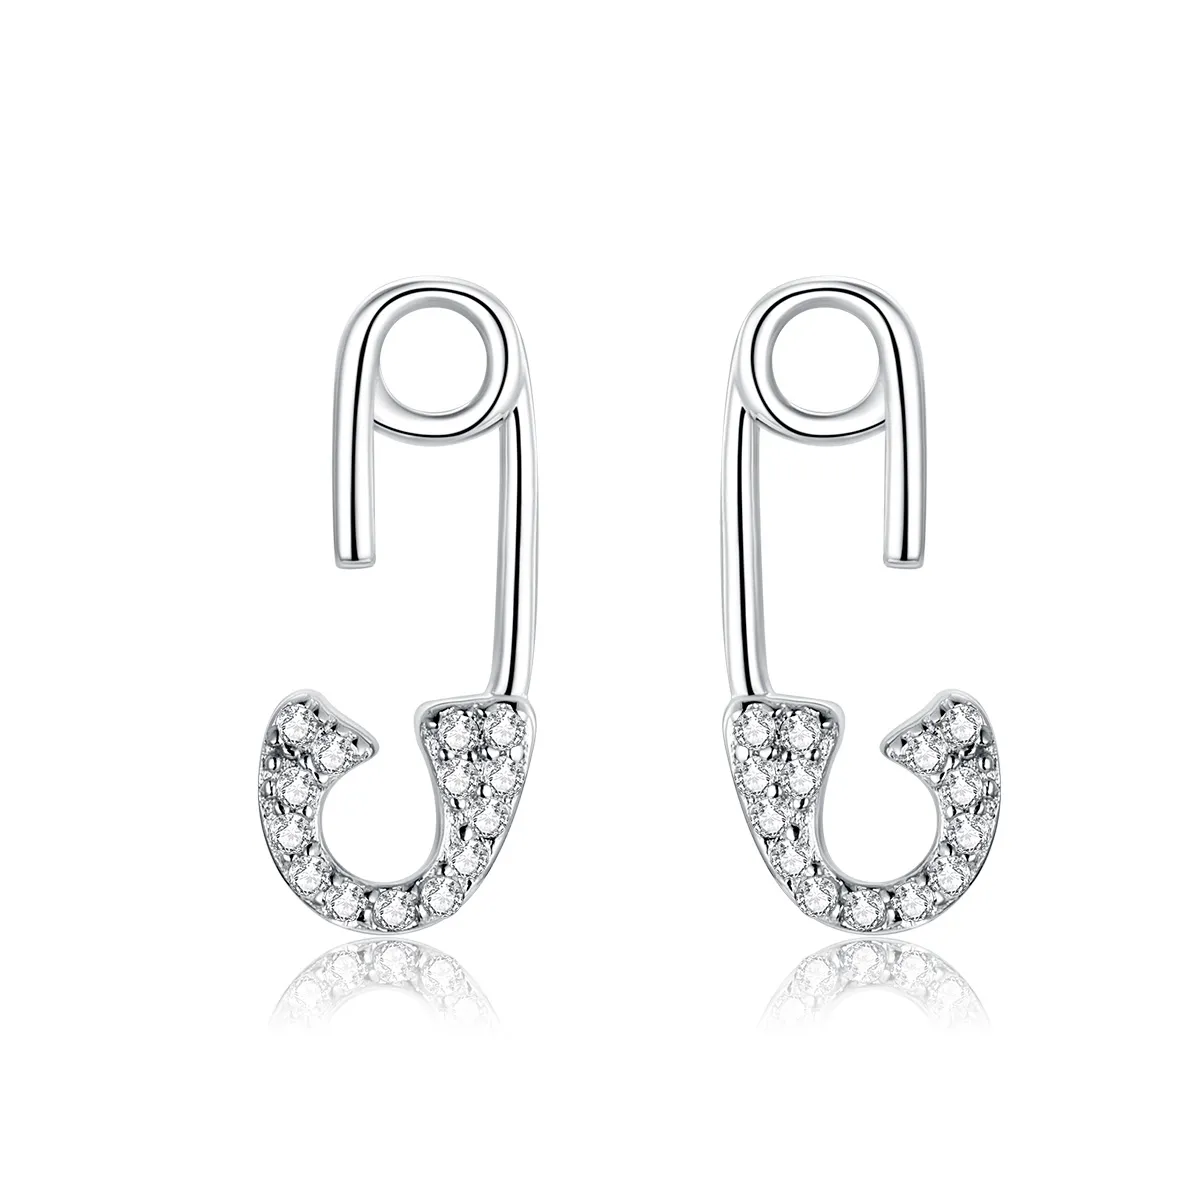 Pandora Style Silver Love safety pin Stud Earrings - BSE284